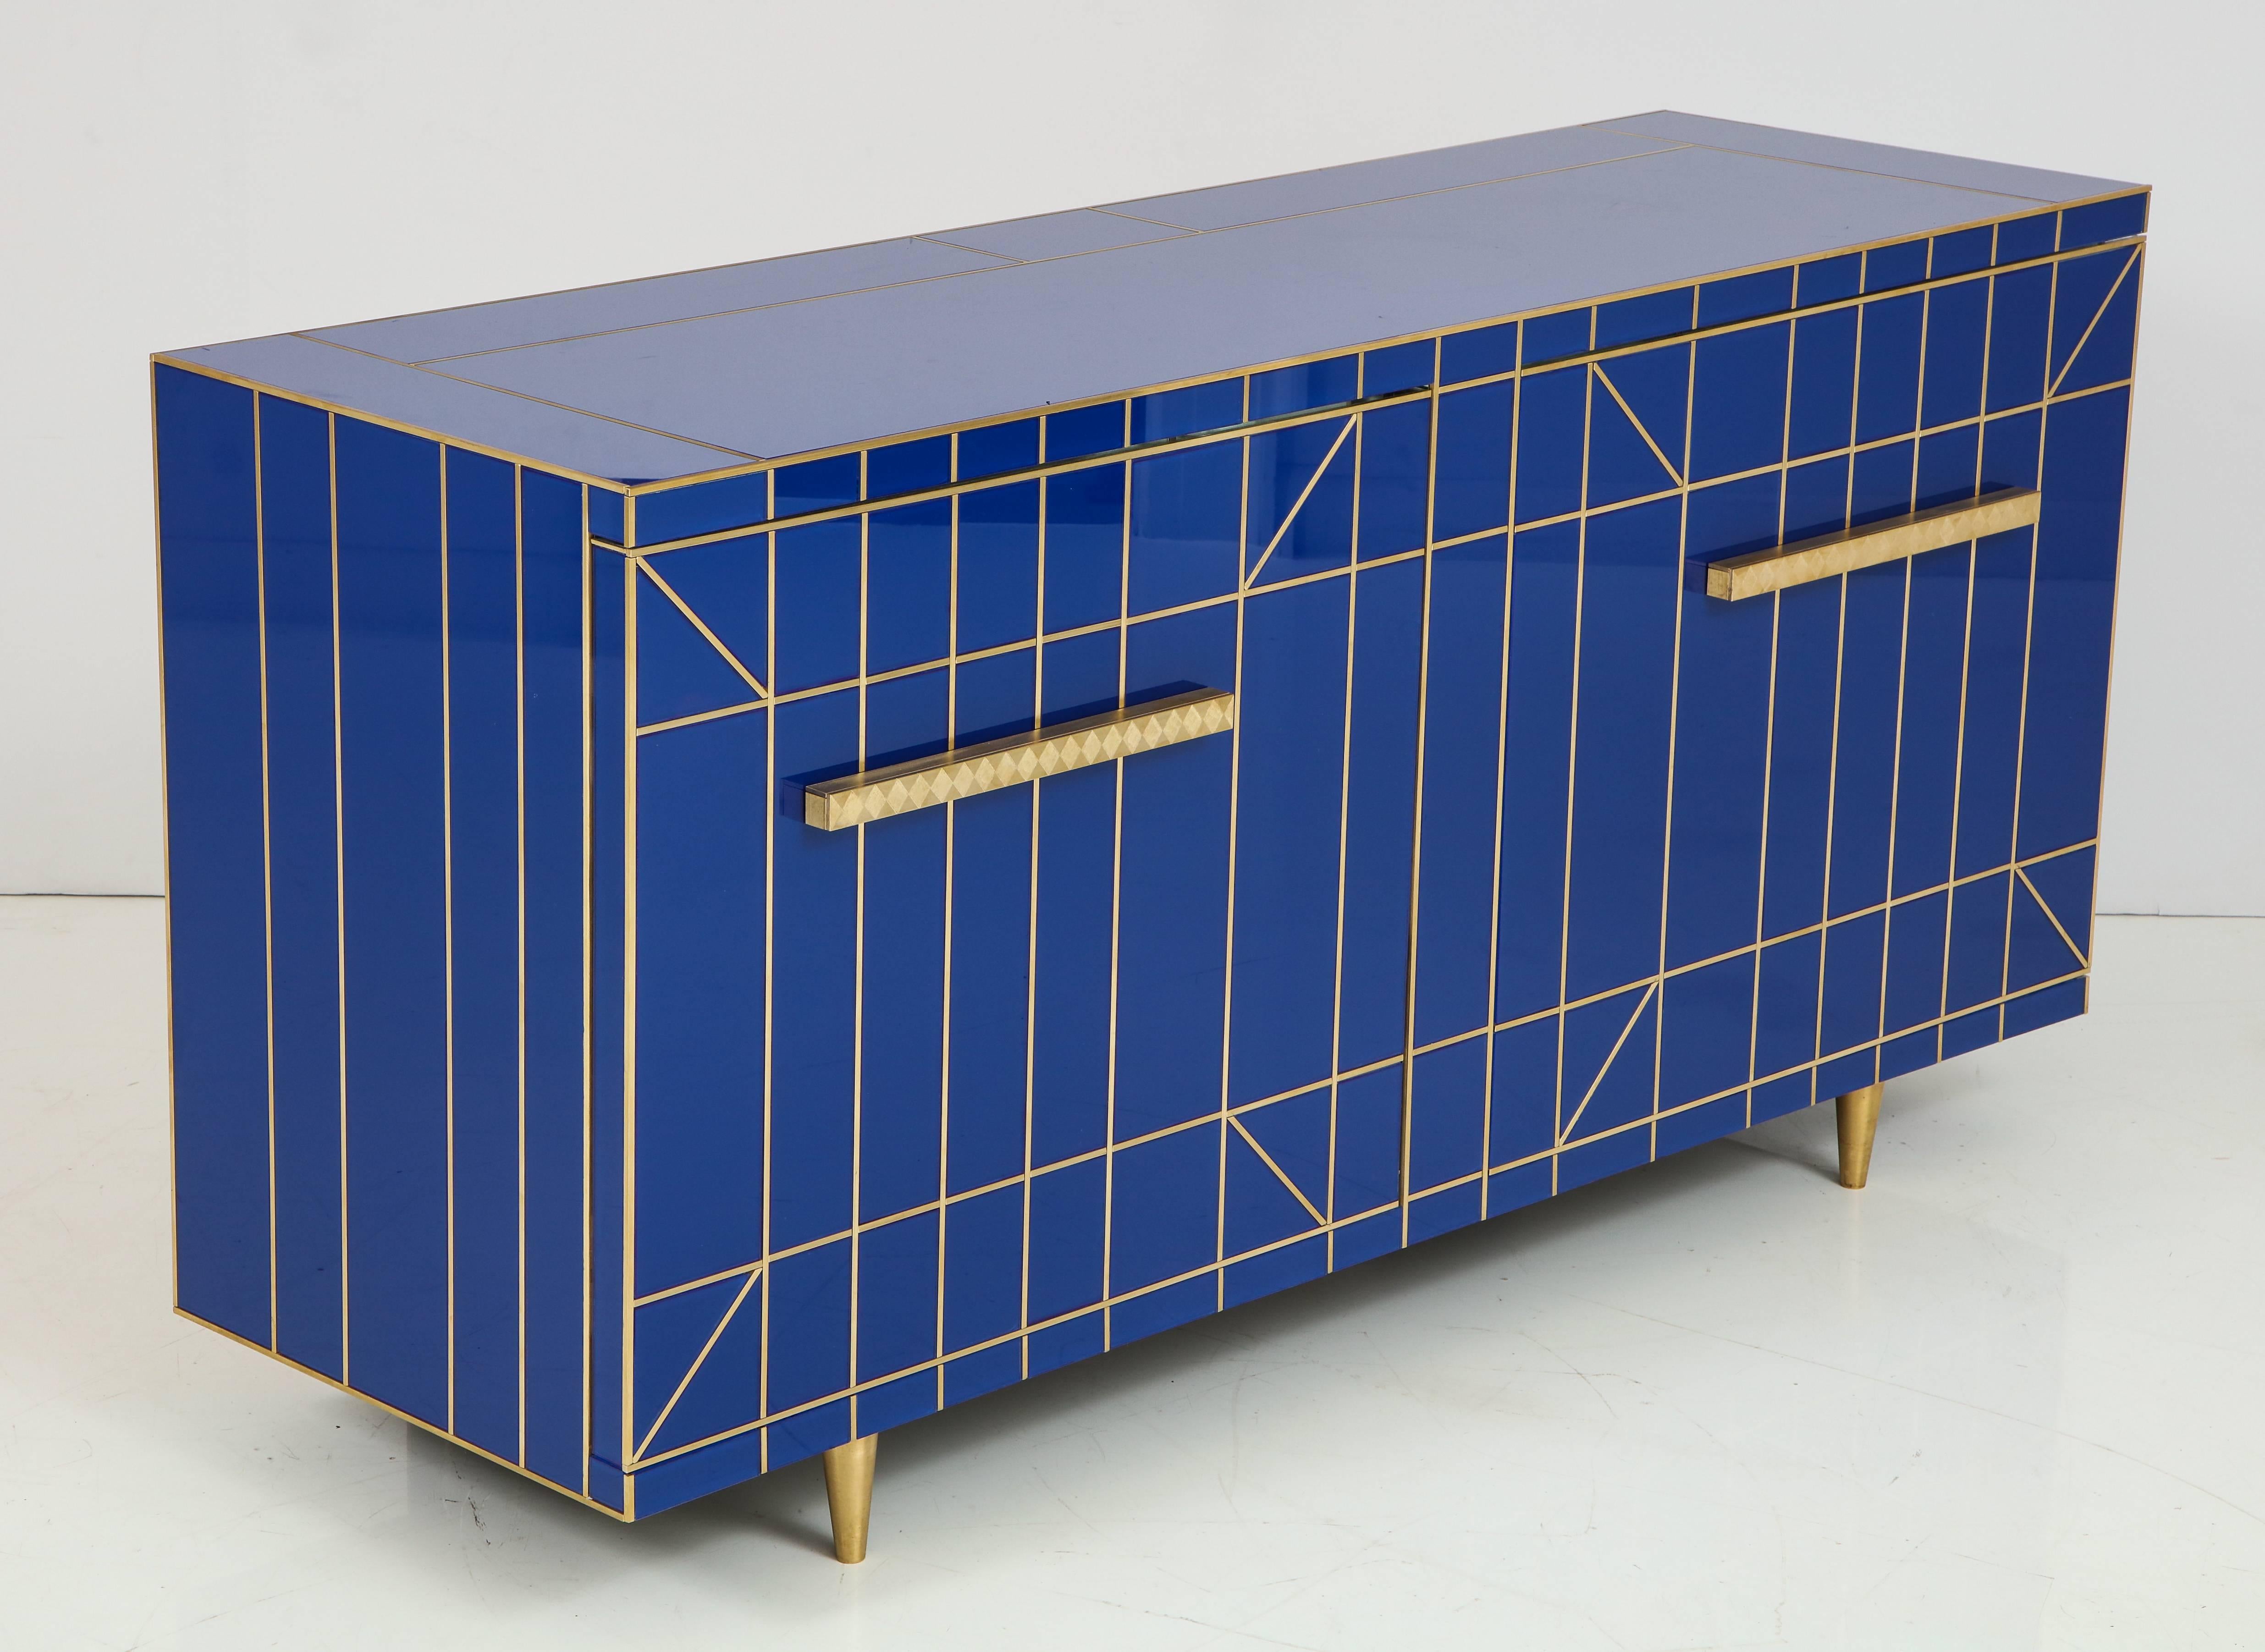 Cobalt blue glass sideboard or credenza with tapered brass legs and brass inlays. Interior is lined in mirror. Two doors open to reveal a large storage area separated by a smaller top level shelf that is clad in mirror. This is a custom piece